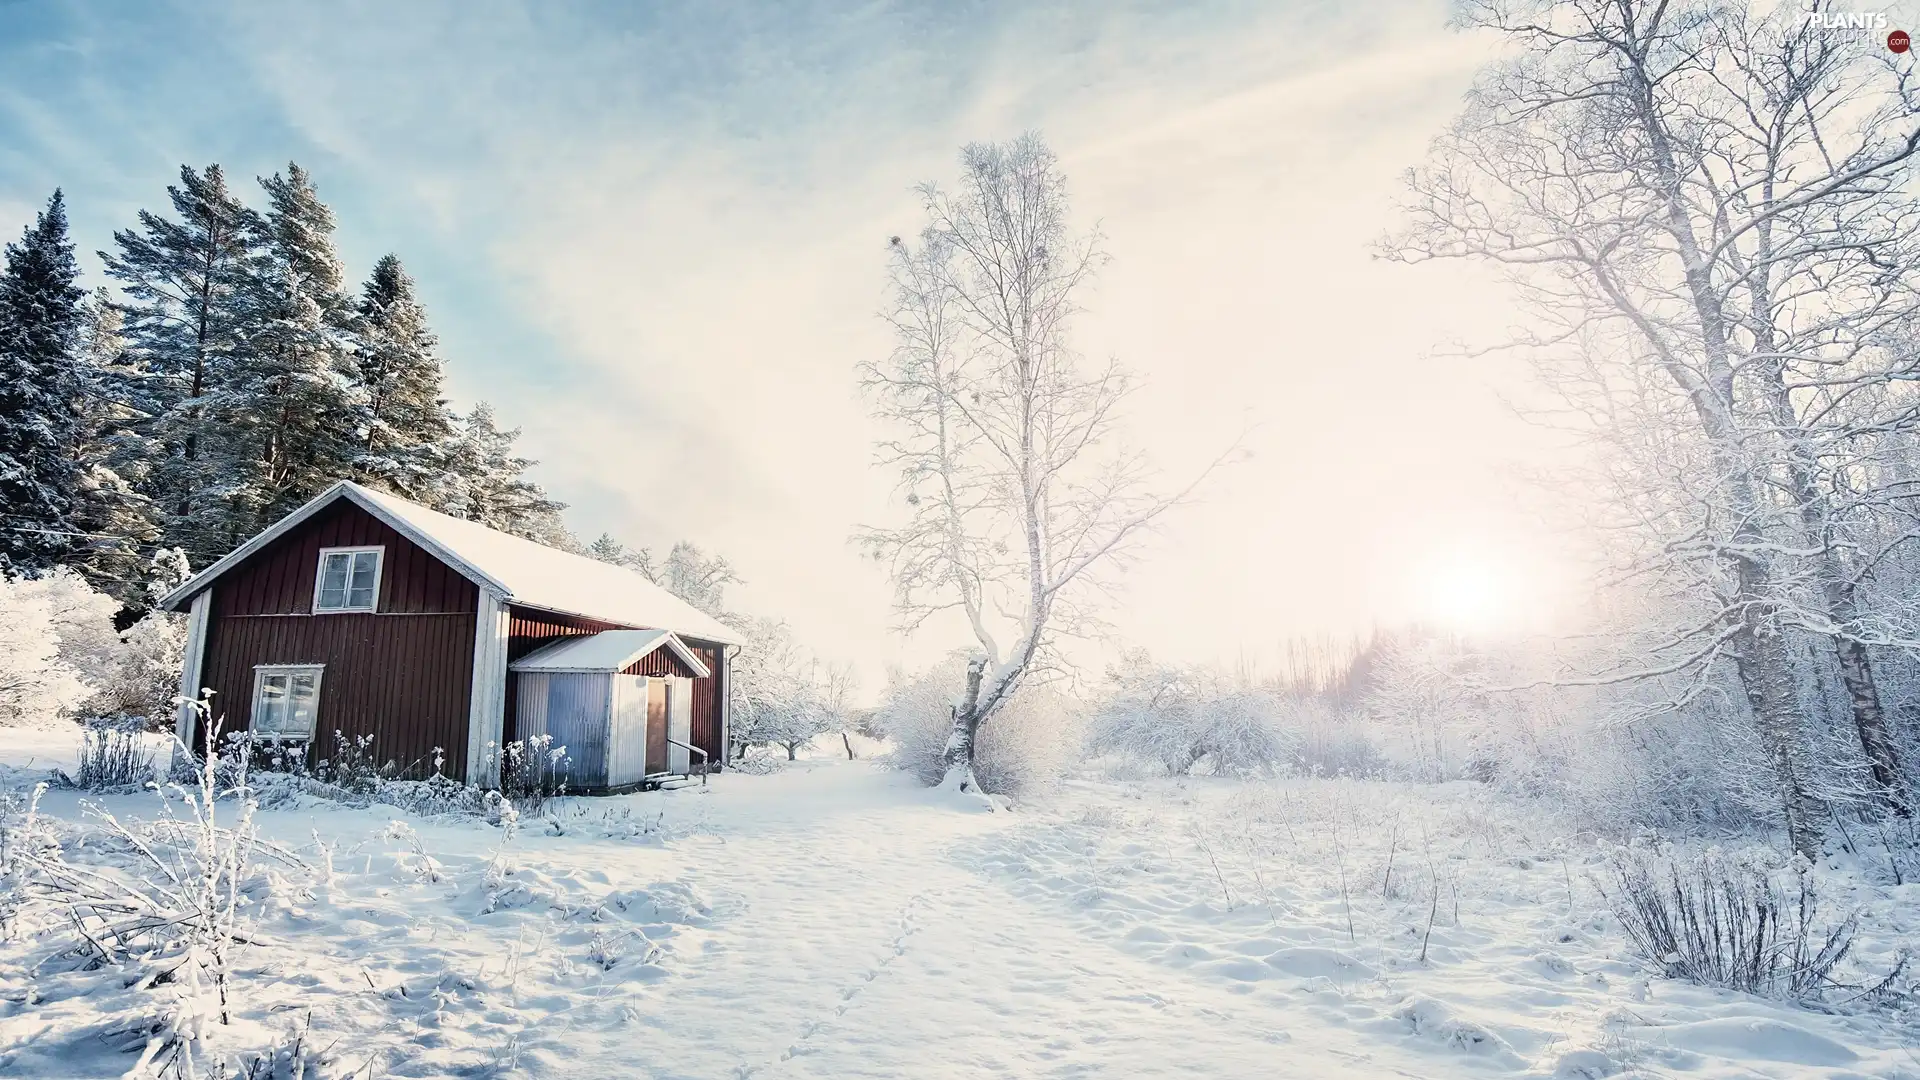 viewes, winter, Way, Sunrise, house, trees